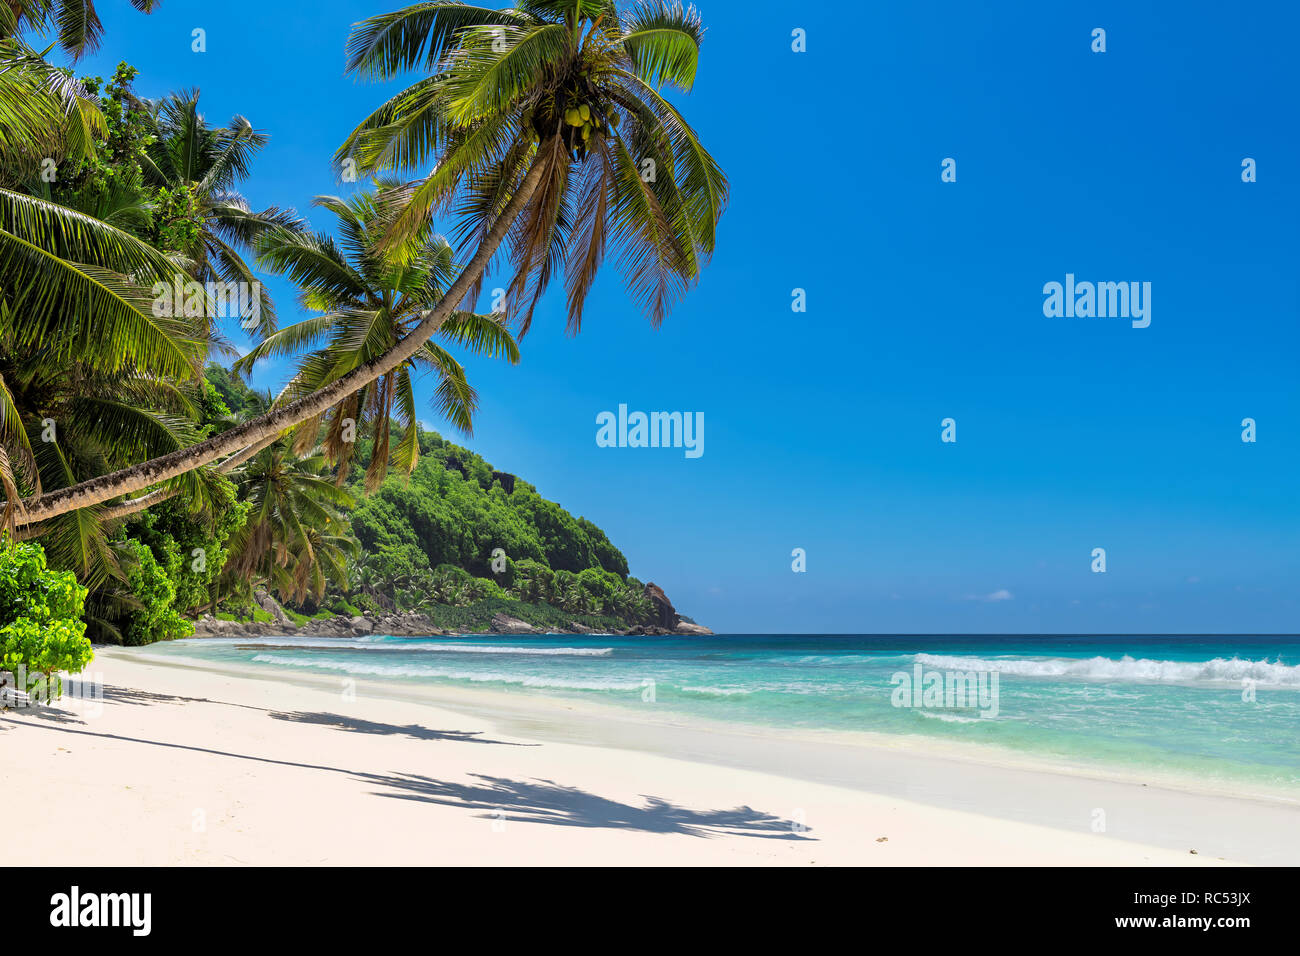 Sandy beach with coco palm and turquoise sea. Stock Photo